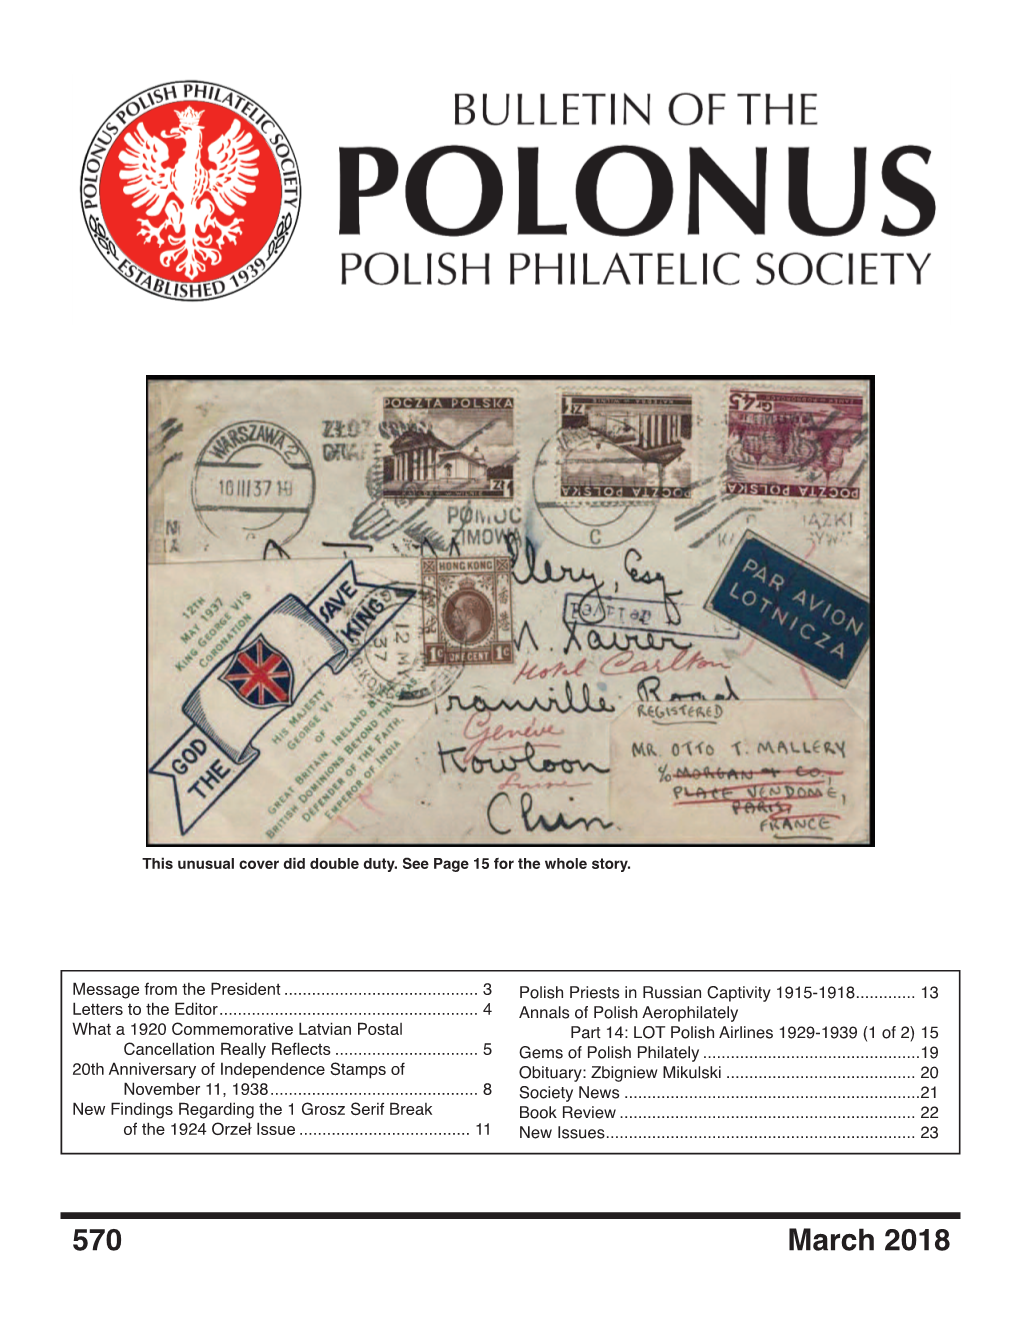 570 March 2018 POLONUS Polish Philatelic Society Andrew Katz Officers and Directors Publication Committee Translation Dr